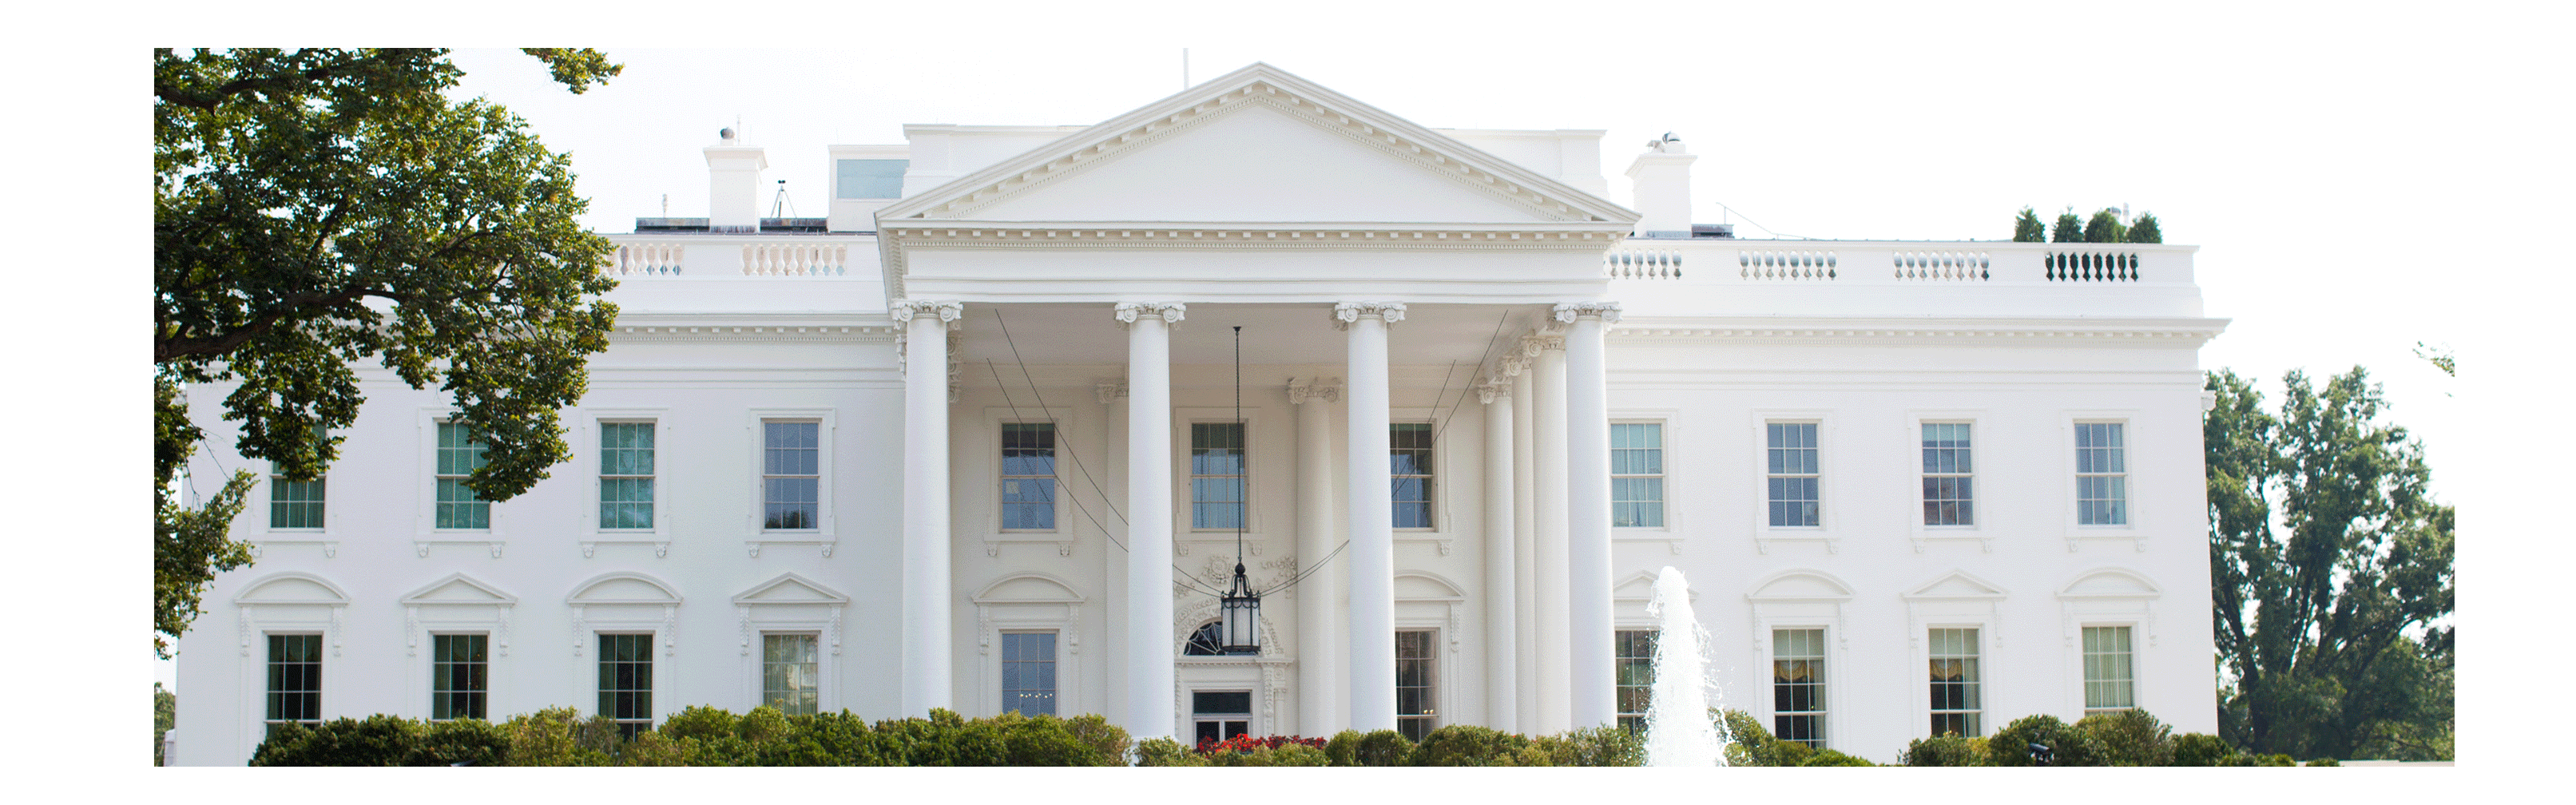 White House PNG Image in High Definition pngteam.com